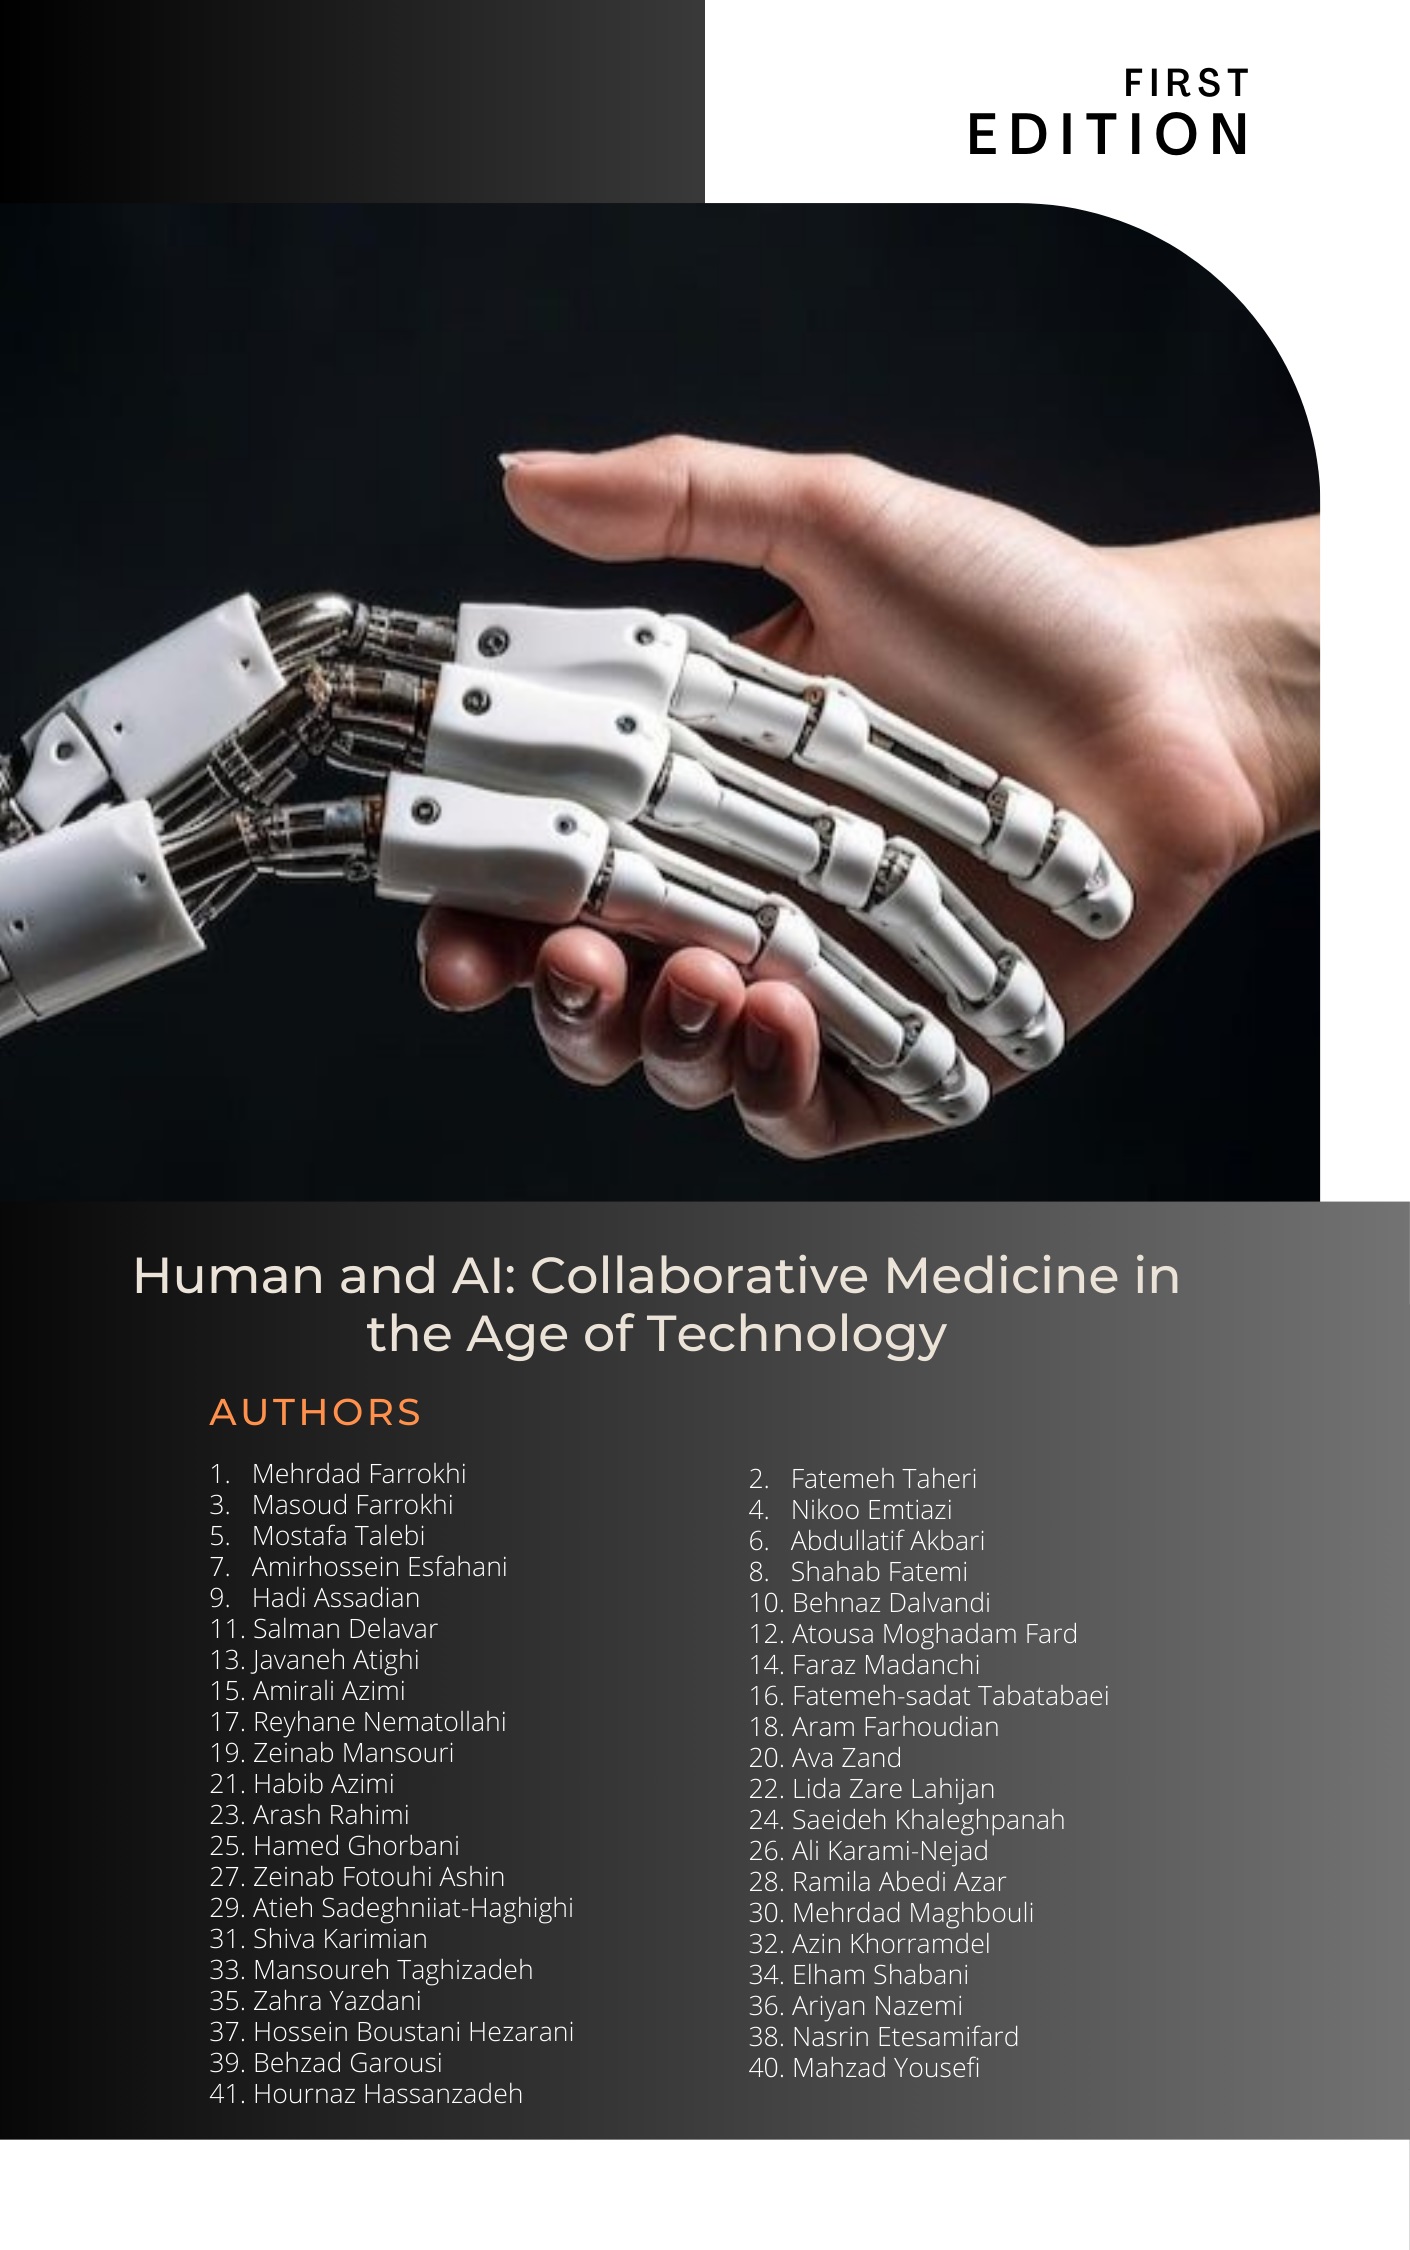 Human and AI: Collaborative Medicine in the Age of Technology